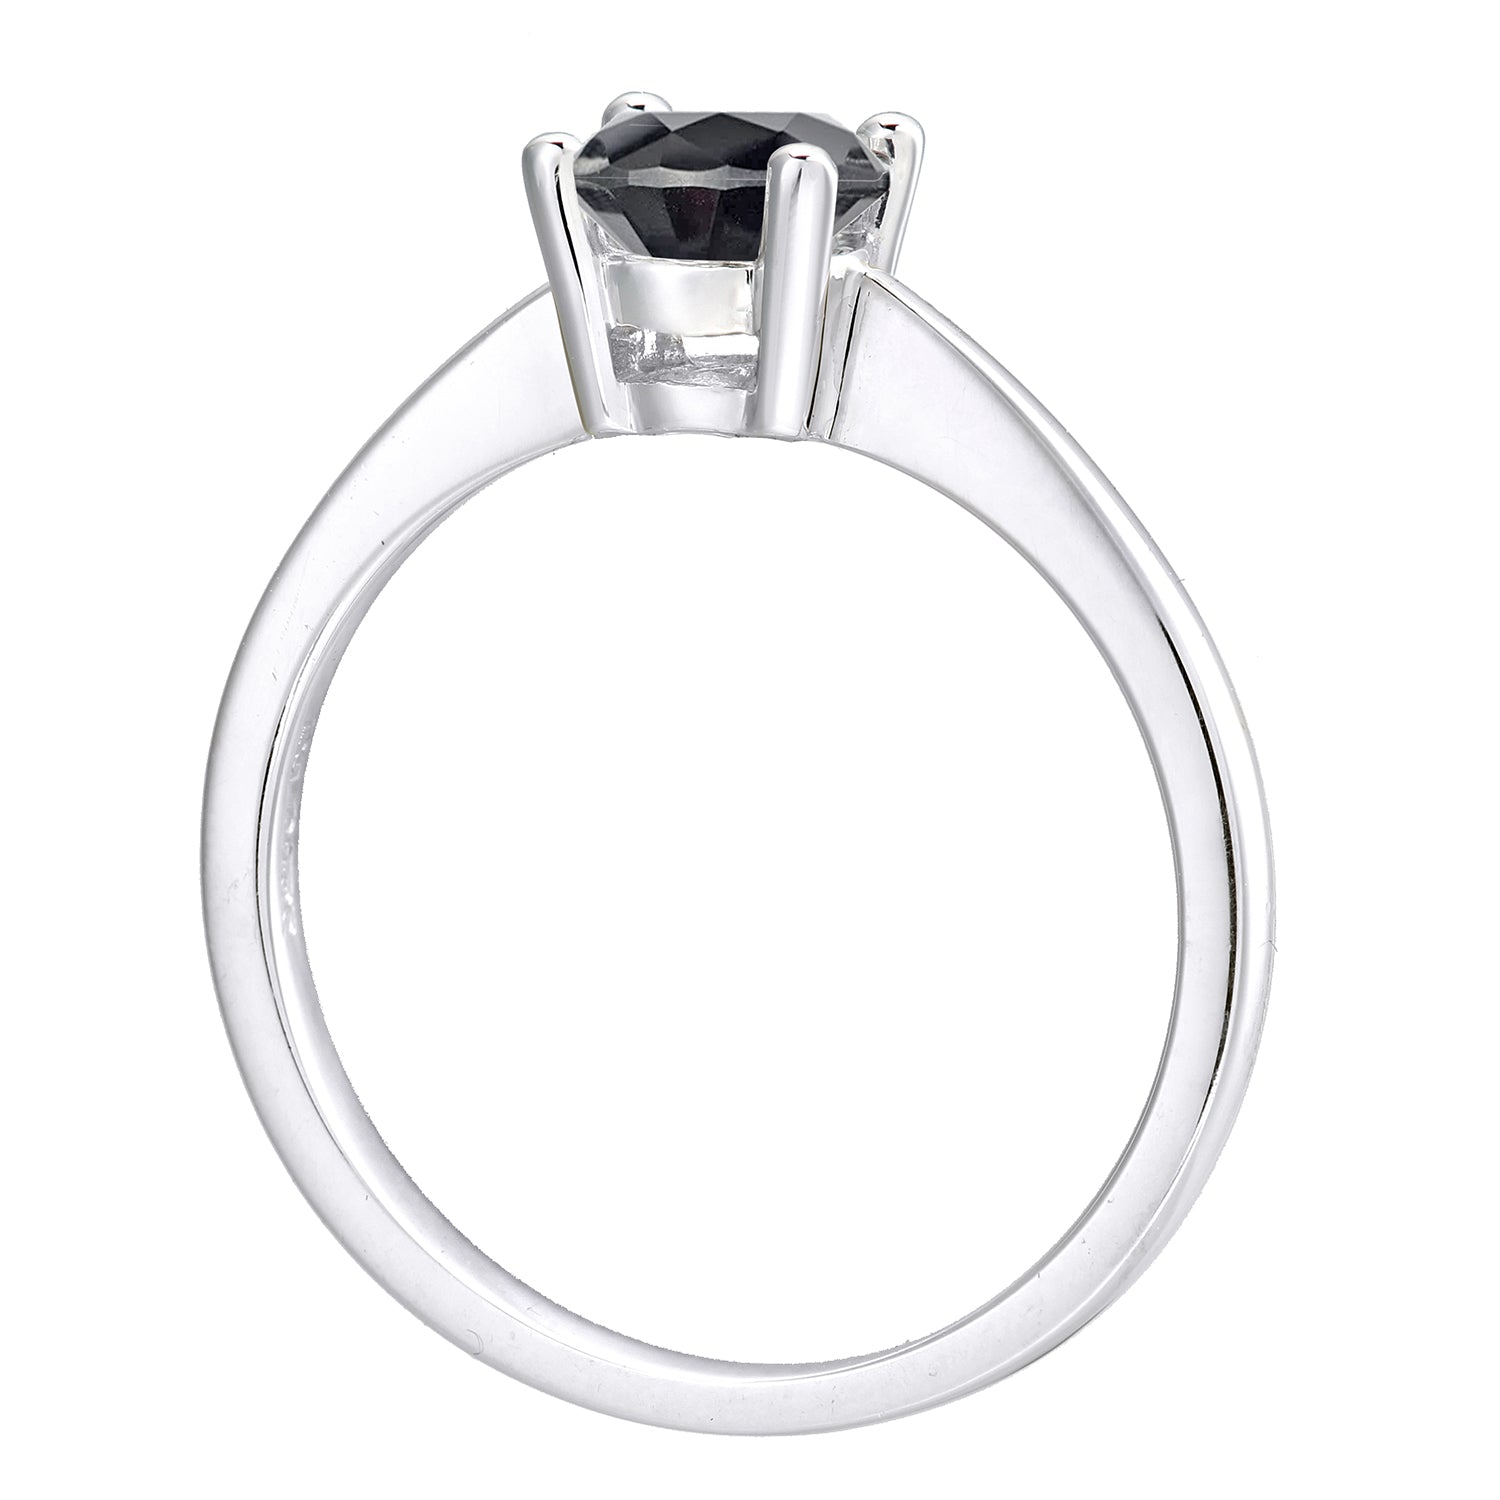 18ct White Gold  1ct Diamond 4 Claw Solitaire Engagement Ring - PR0AXL4689W18BLK